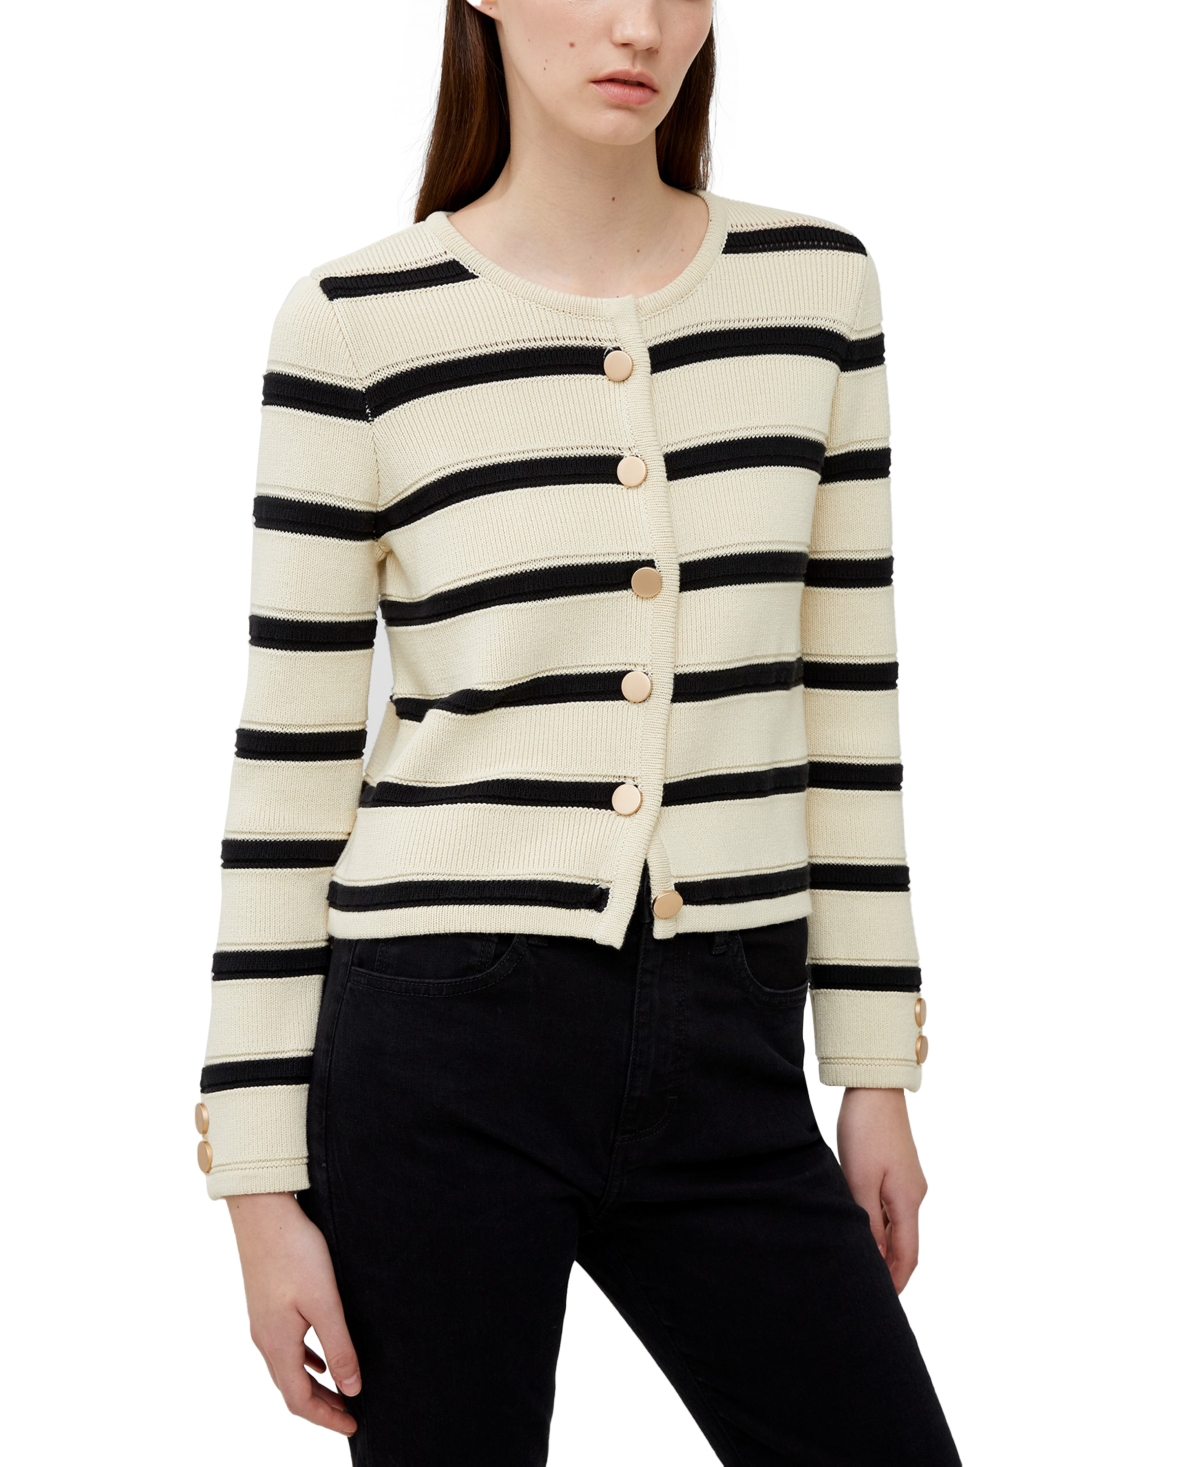 FRENCH CONNECTION WOMEN'S MARLOE STRIPED BUTTON FRONT CARDIGAN